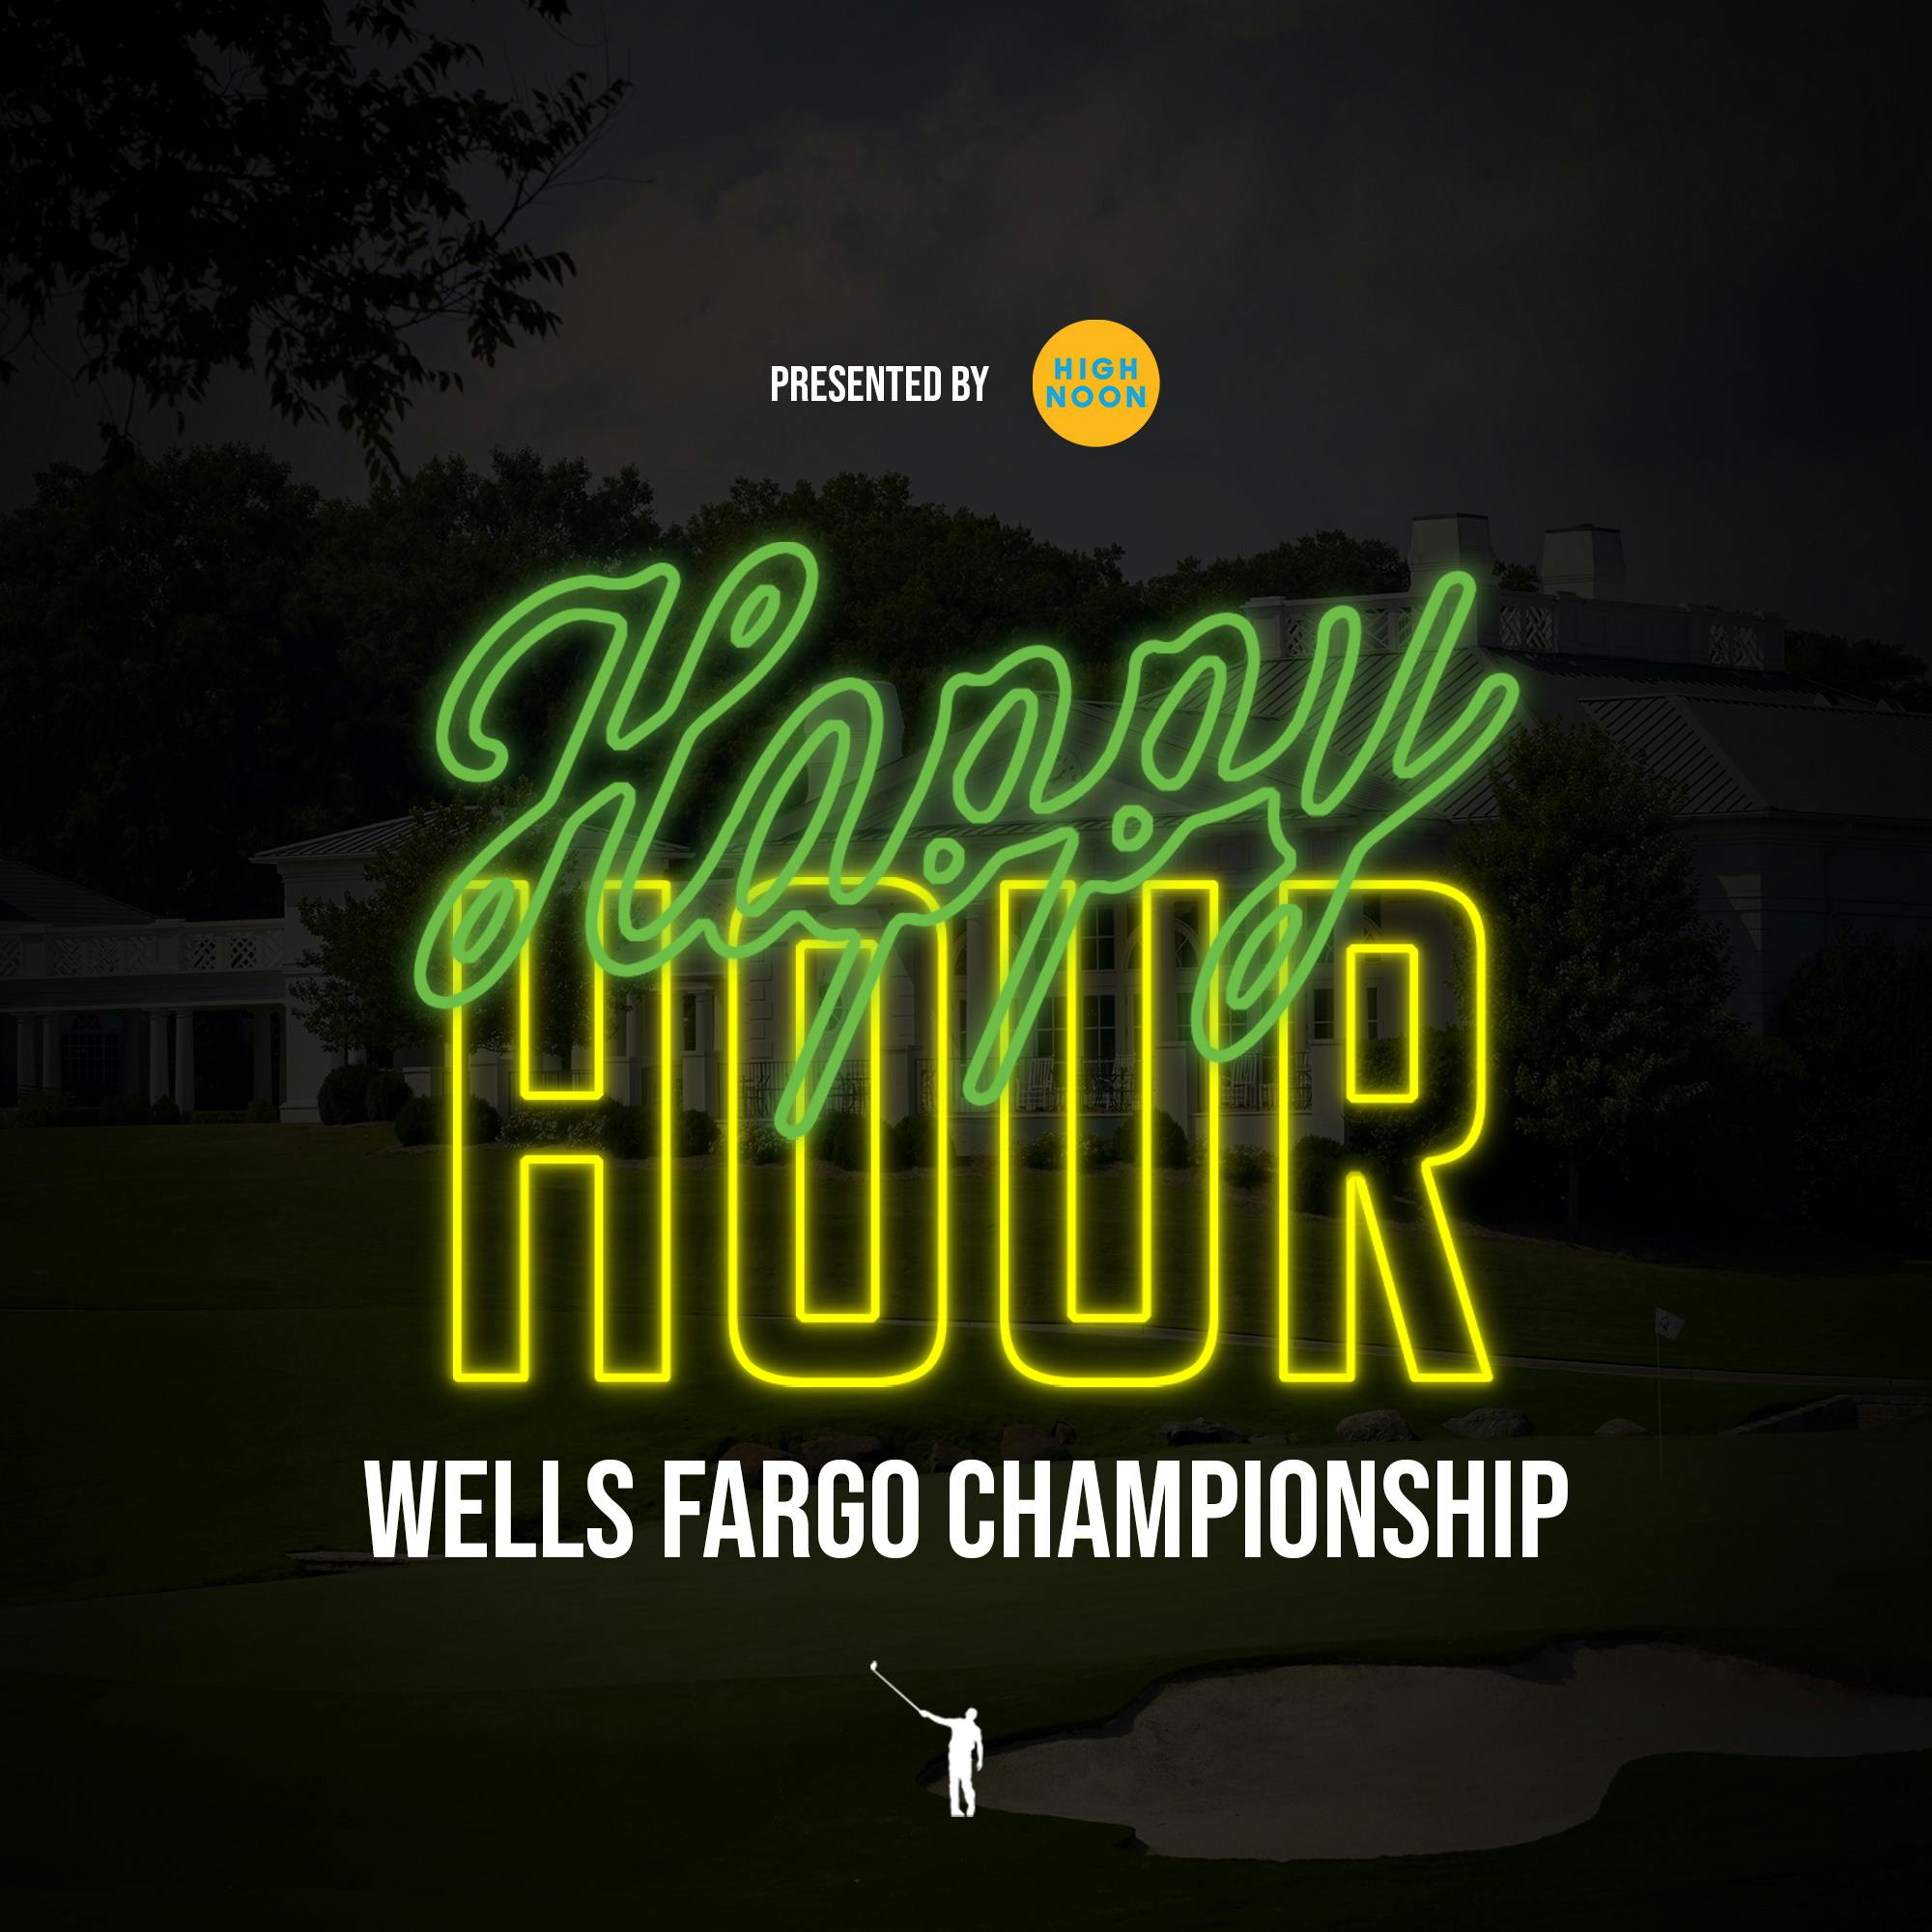 832 - Wells Fargo Preview, Johnson Wagner defends Quail Hollow, Rory won't be joining the board (Happy Hour Show)